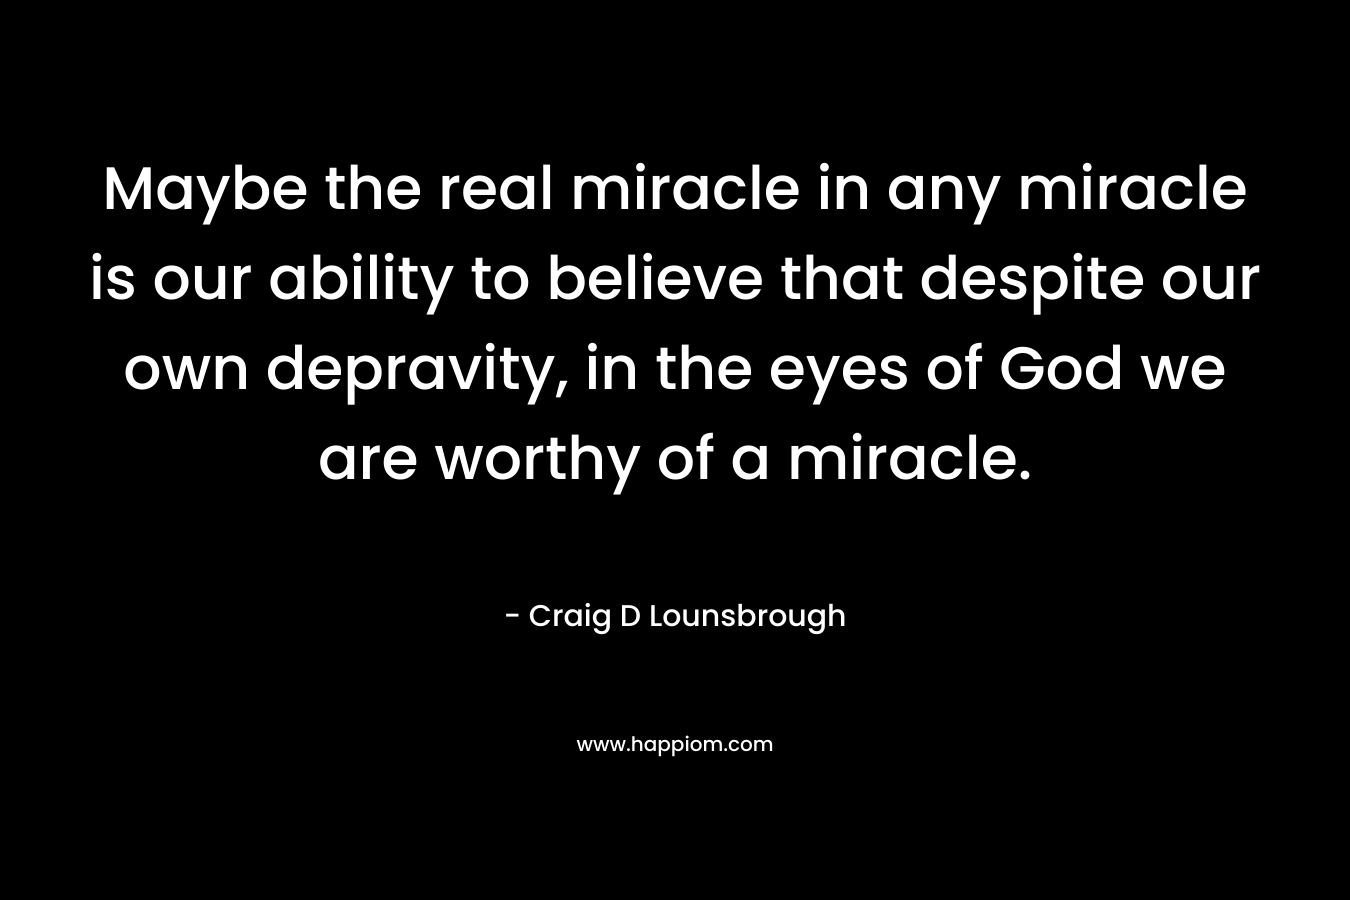 Maybe the real miracle in any miracle is our ability to believe that despite our own depravity, in the eyes of God we are worthy of a miracle.